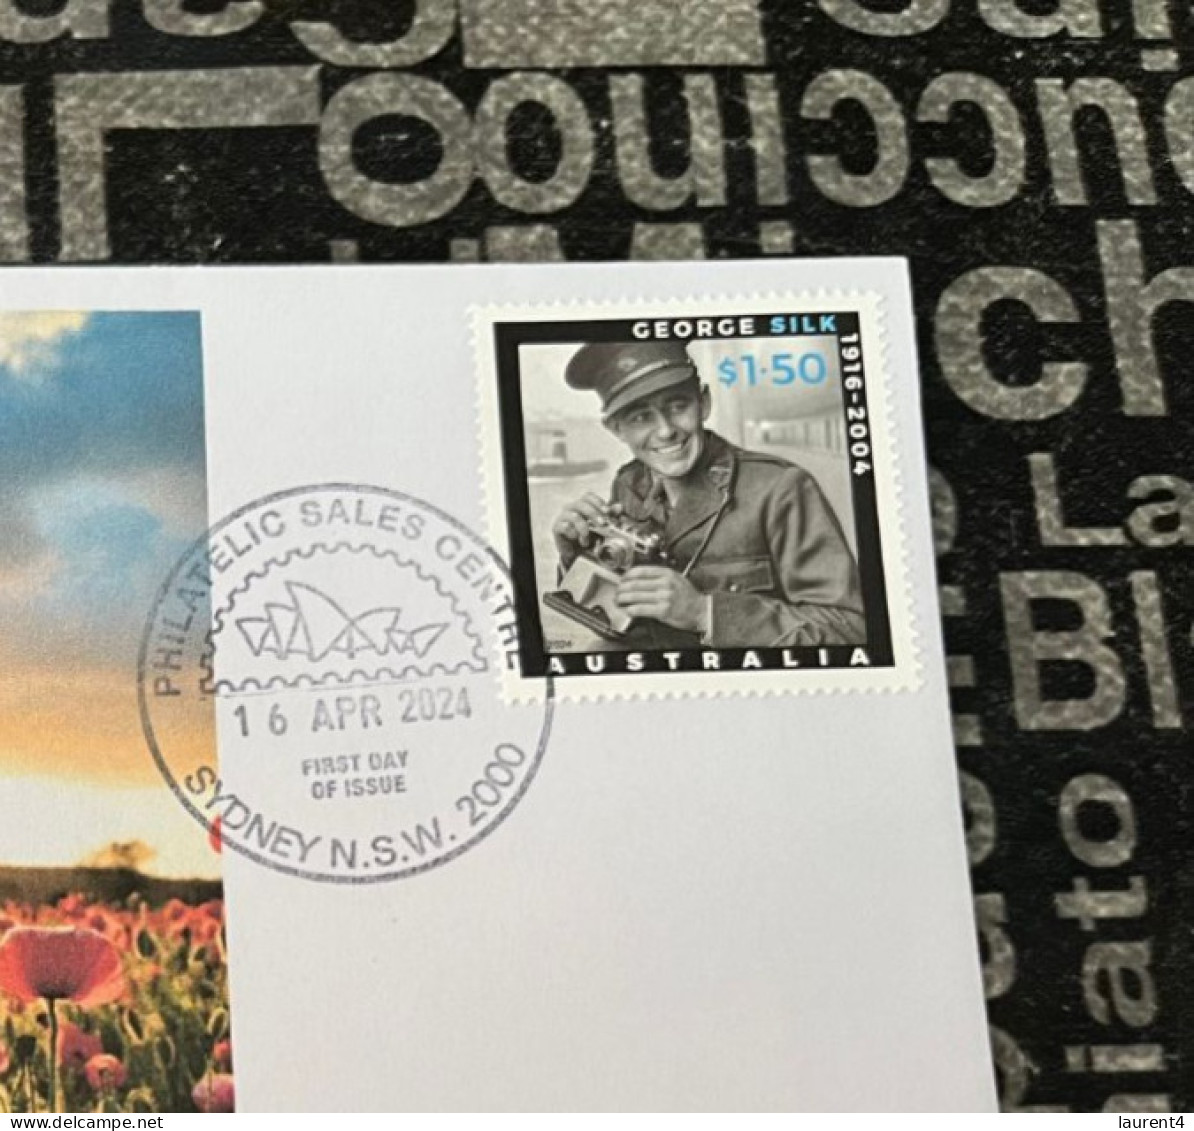 16-4-2024 (4 X 22) Australia ANZAC 2024 - New Stamp Issued 16-4-2024 (on Cover) - Covers & Documents